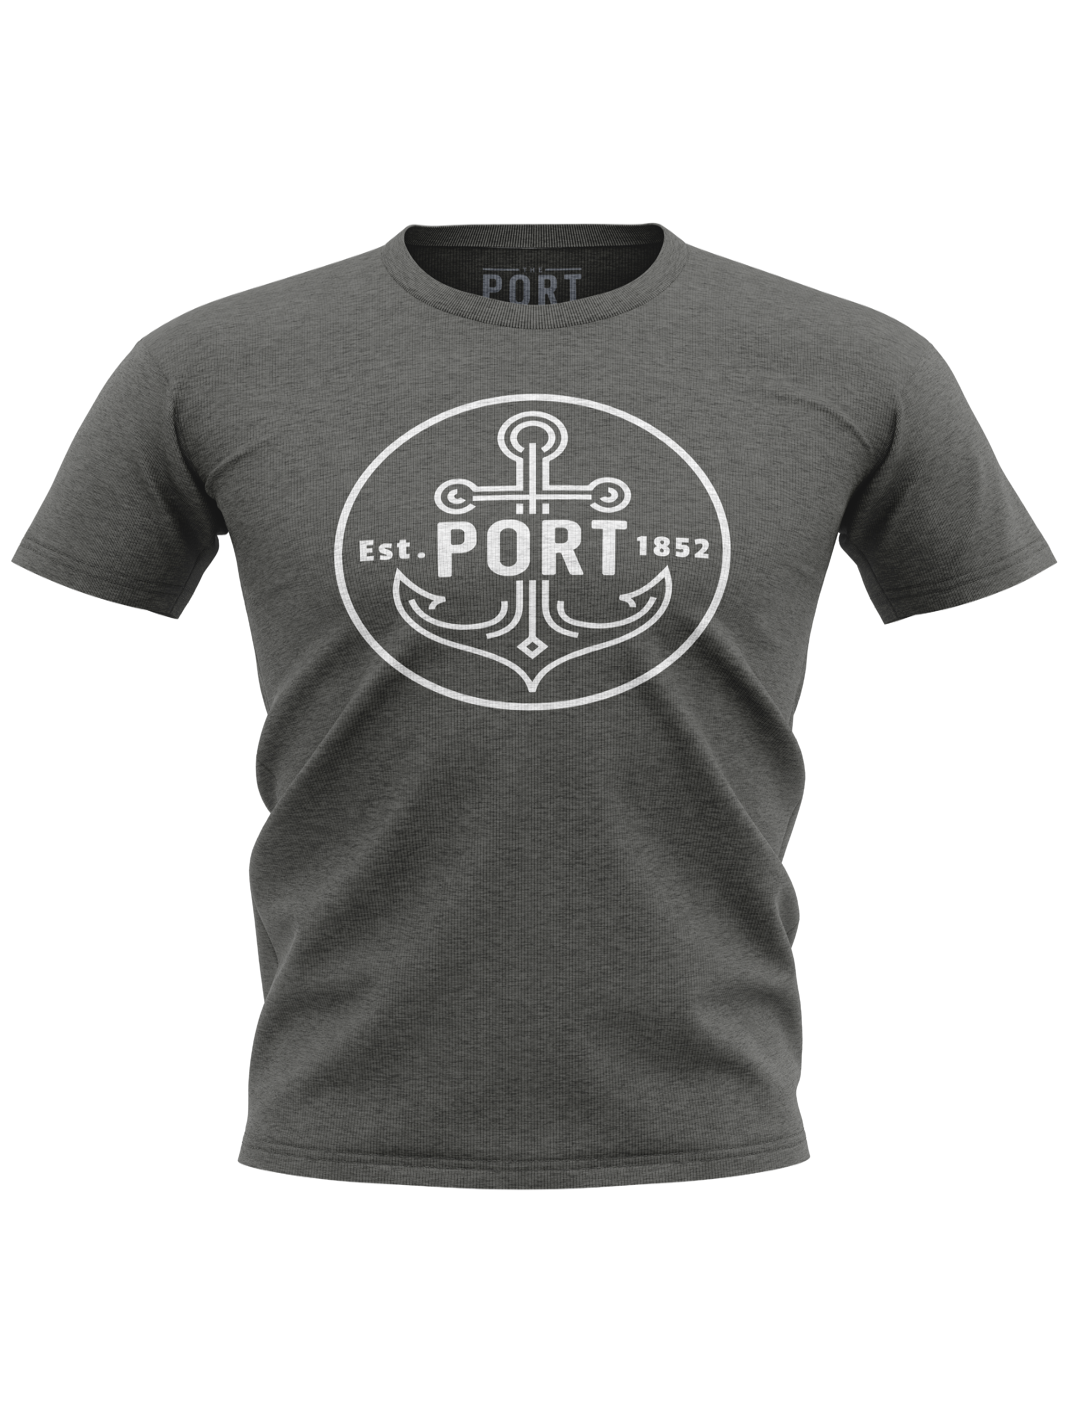 Mens Charcoal Heather Port Anchor Tee